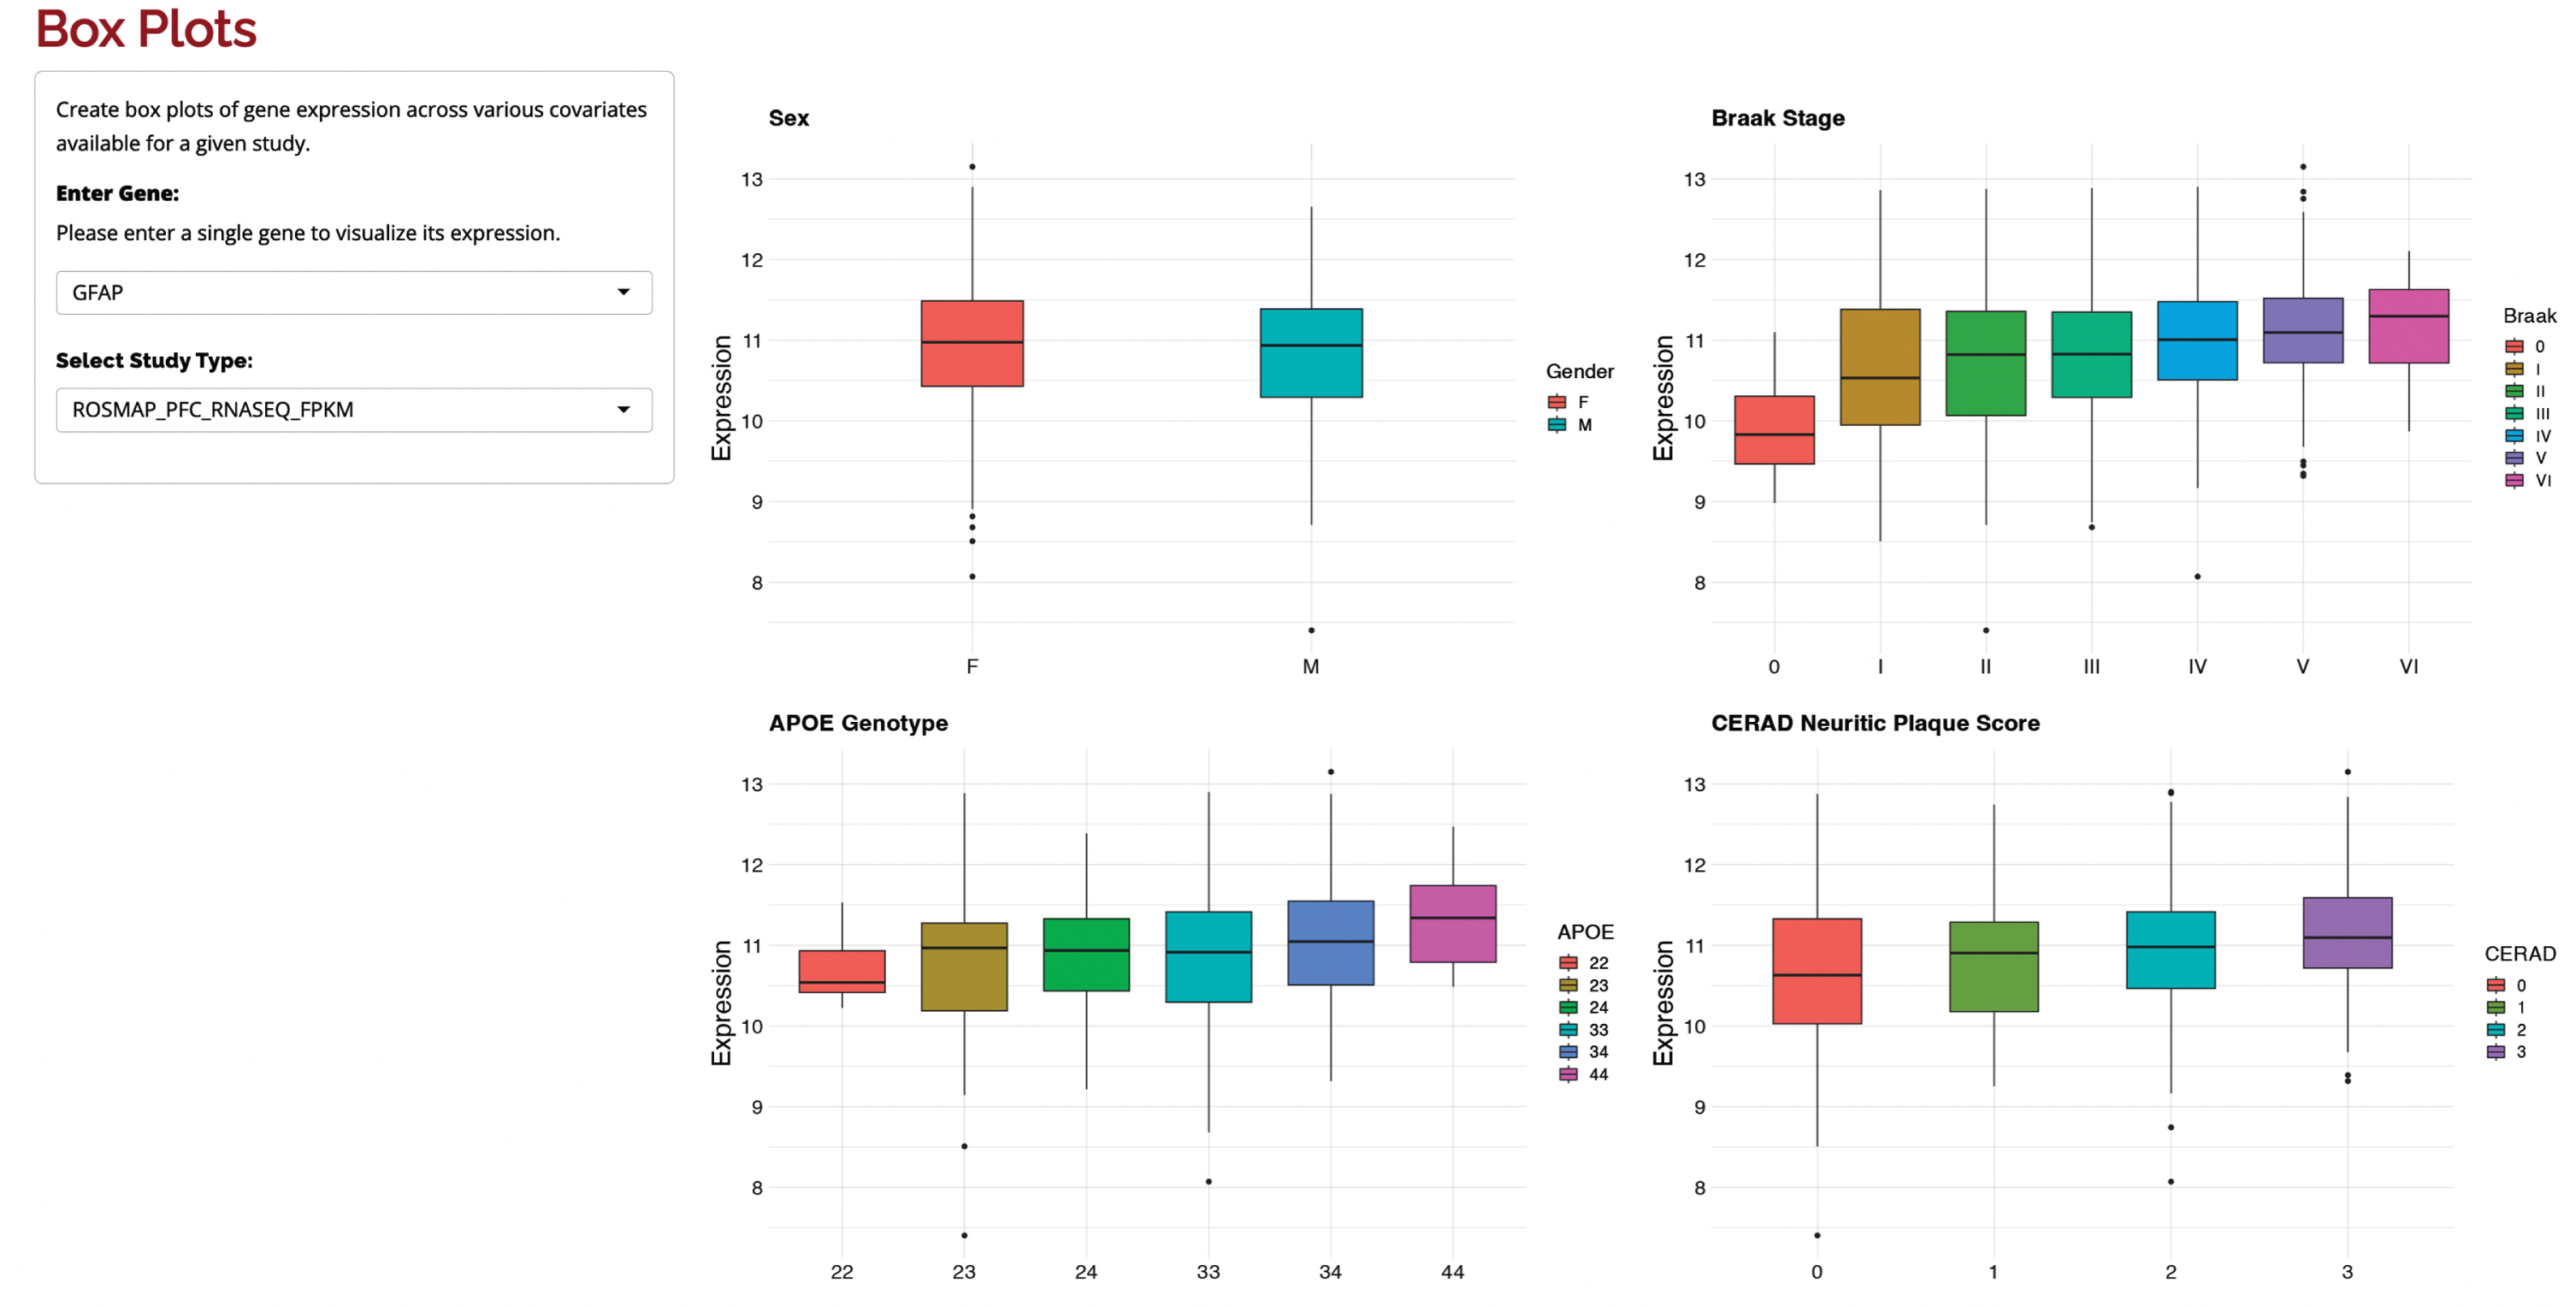 Box plots of GFAP in the ROSMAP dataset. GFAP expression shown across sex, APOE genotype, Braak stage, and CERAD neuritic plaque score. The box plots on the right illustrate the rise in GFAP expression with increasing AD neuropathology.